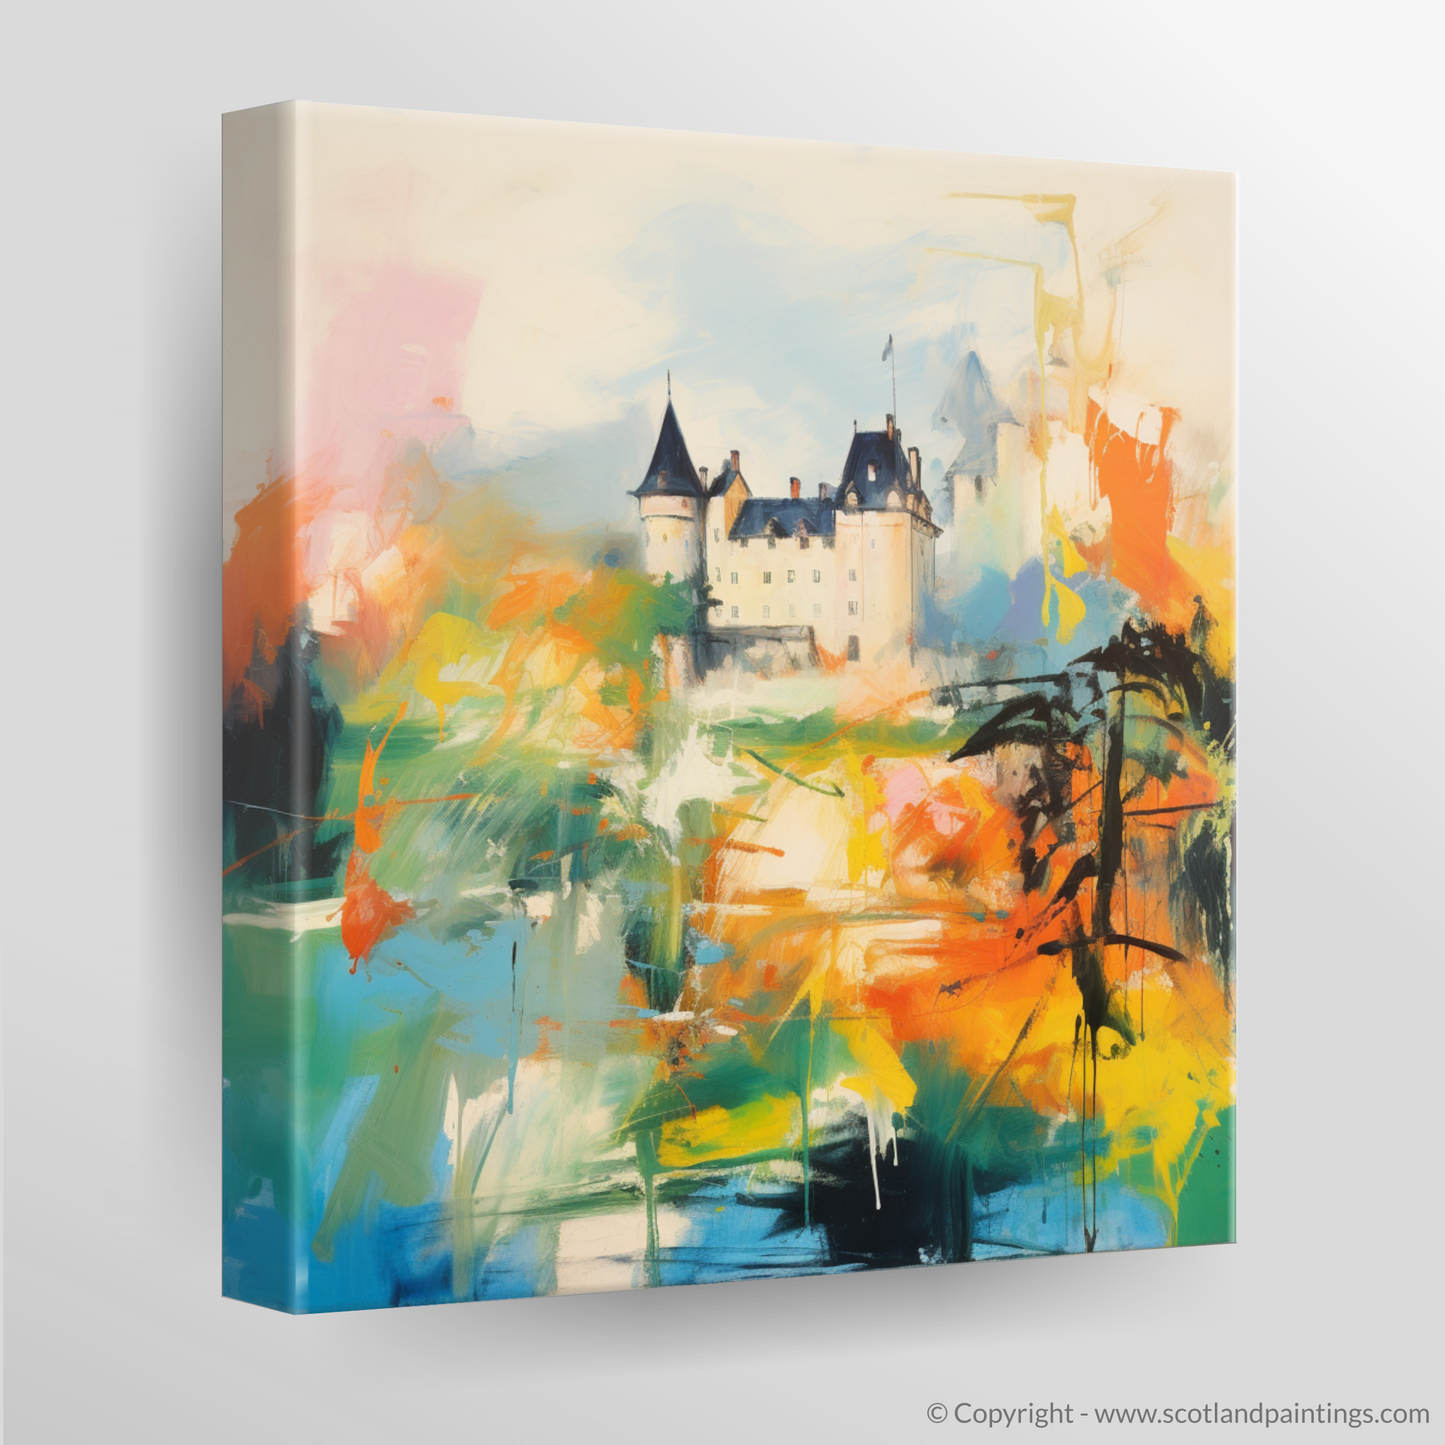 Cawdor Castle Unveiled: An Abstract Ode to the Scottish Highlands